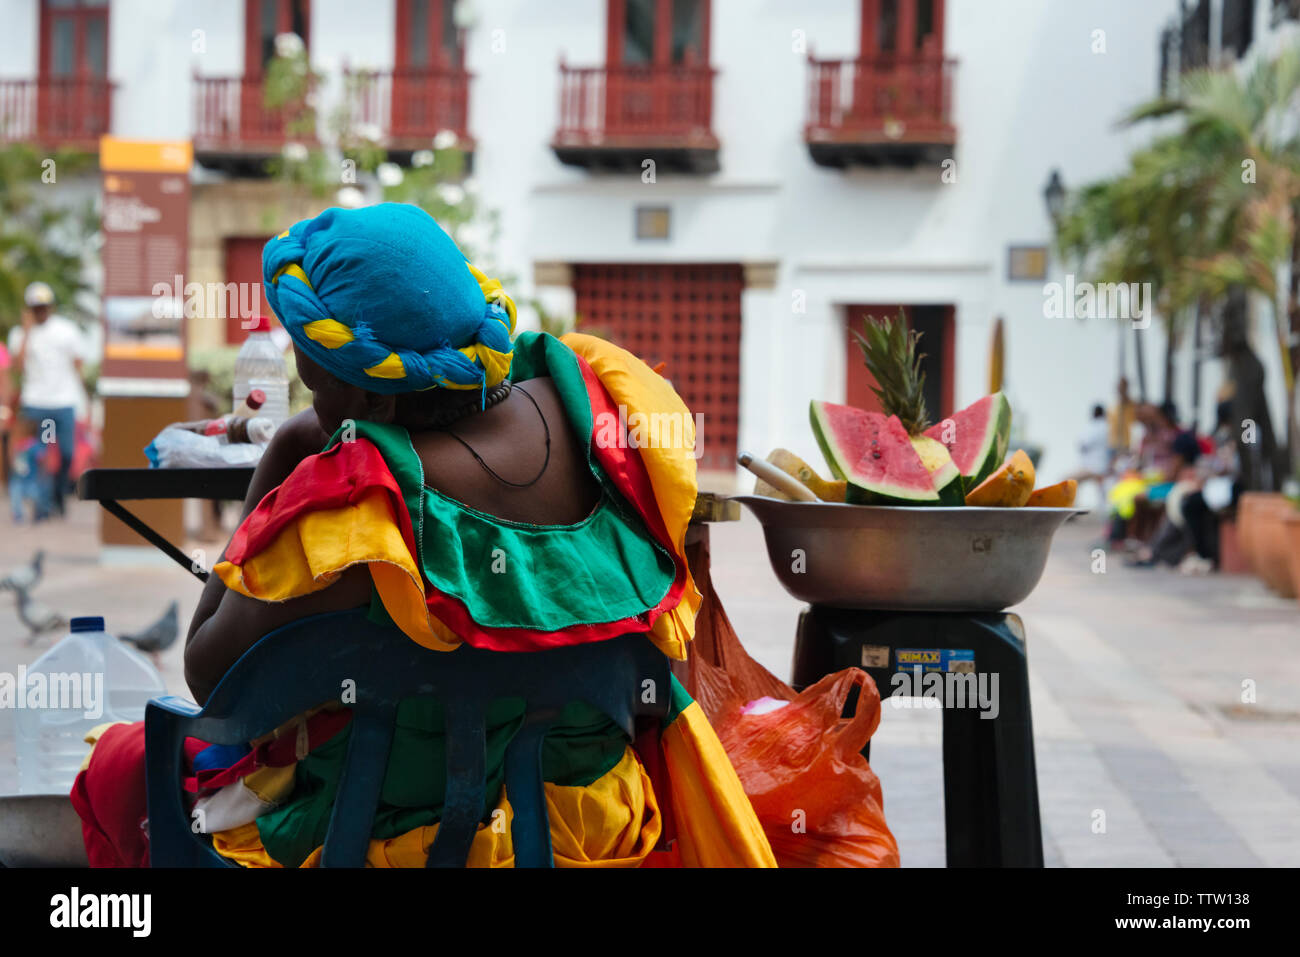 Woman selling fresh fruit in Plaza San Pedro Claver in the old town, Cartagena, UNESCO World Heritage site, Bolivar Department, Colombia Stock Photo